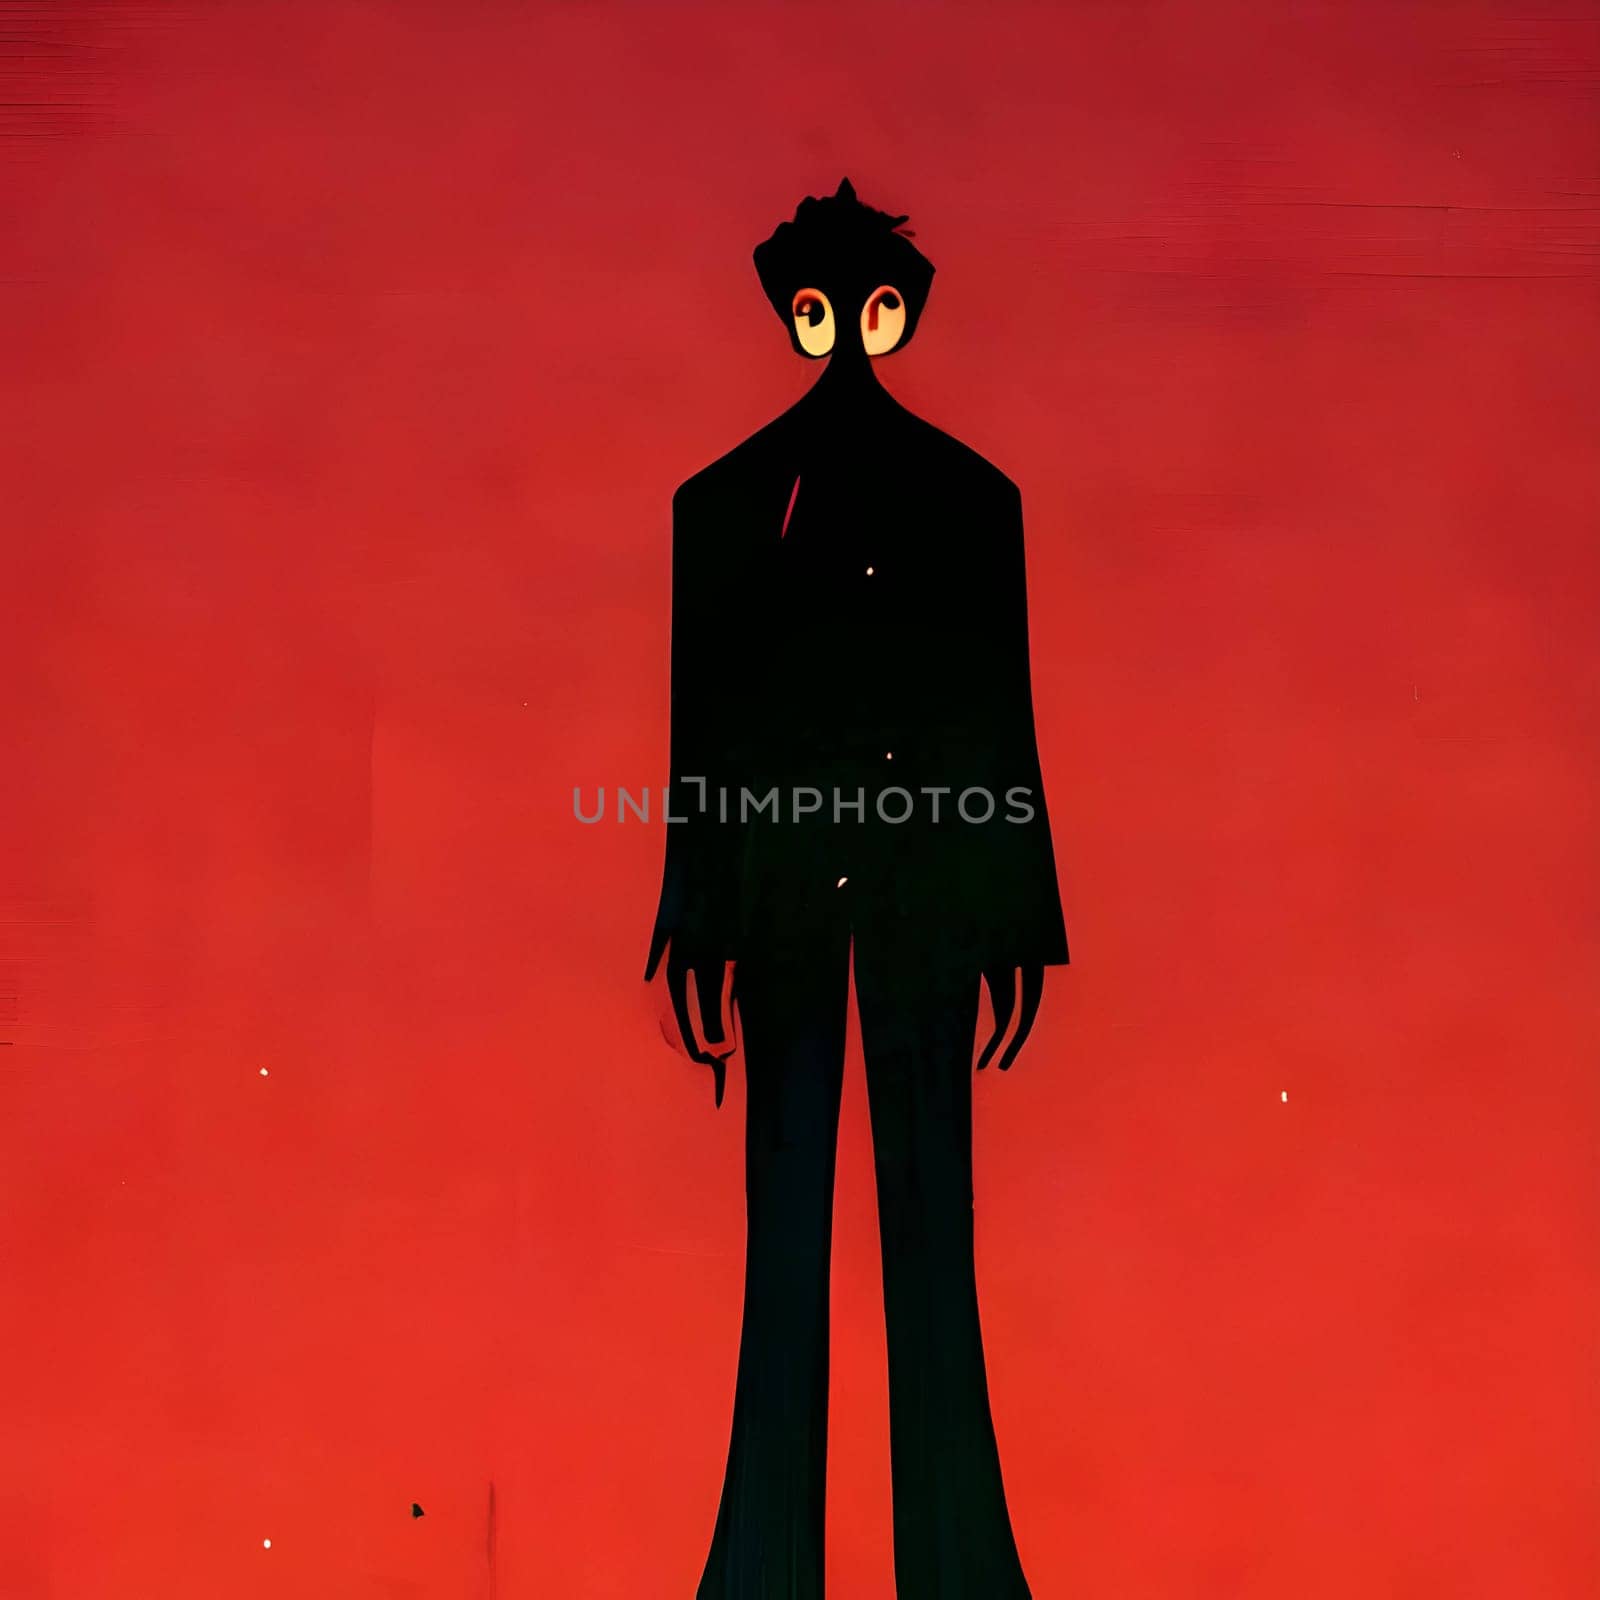 Vector illustration of a creature in black silhouette against a clean red background, capturing graceful forms.